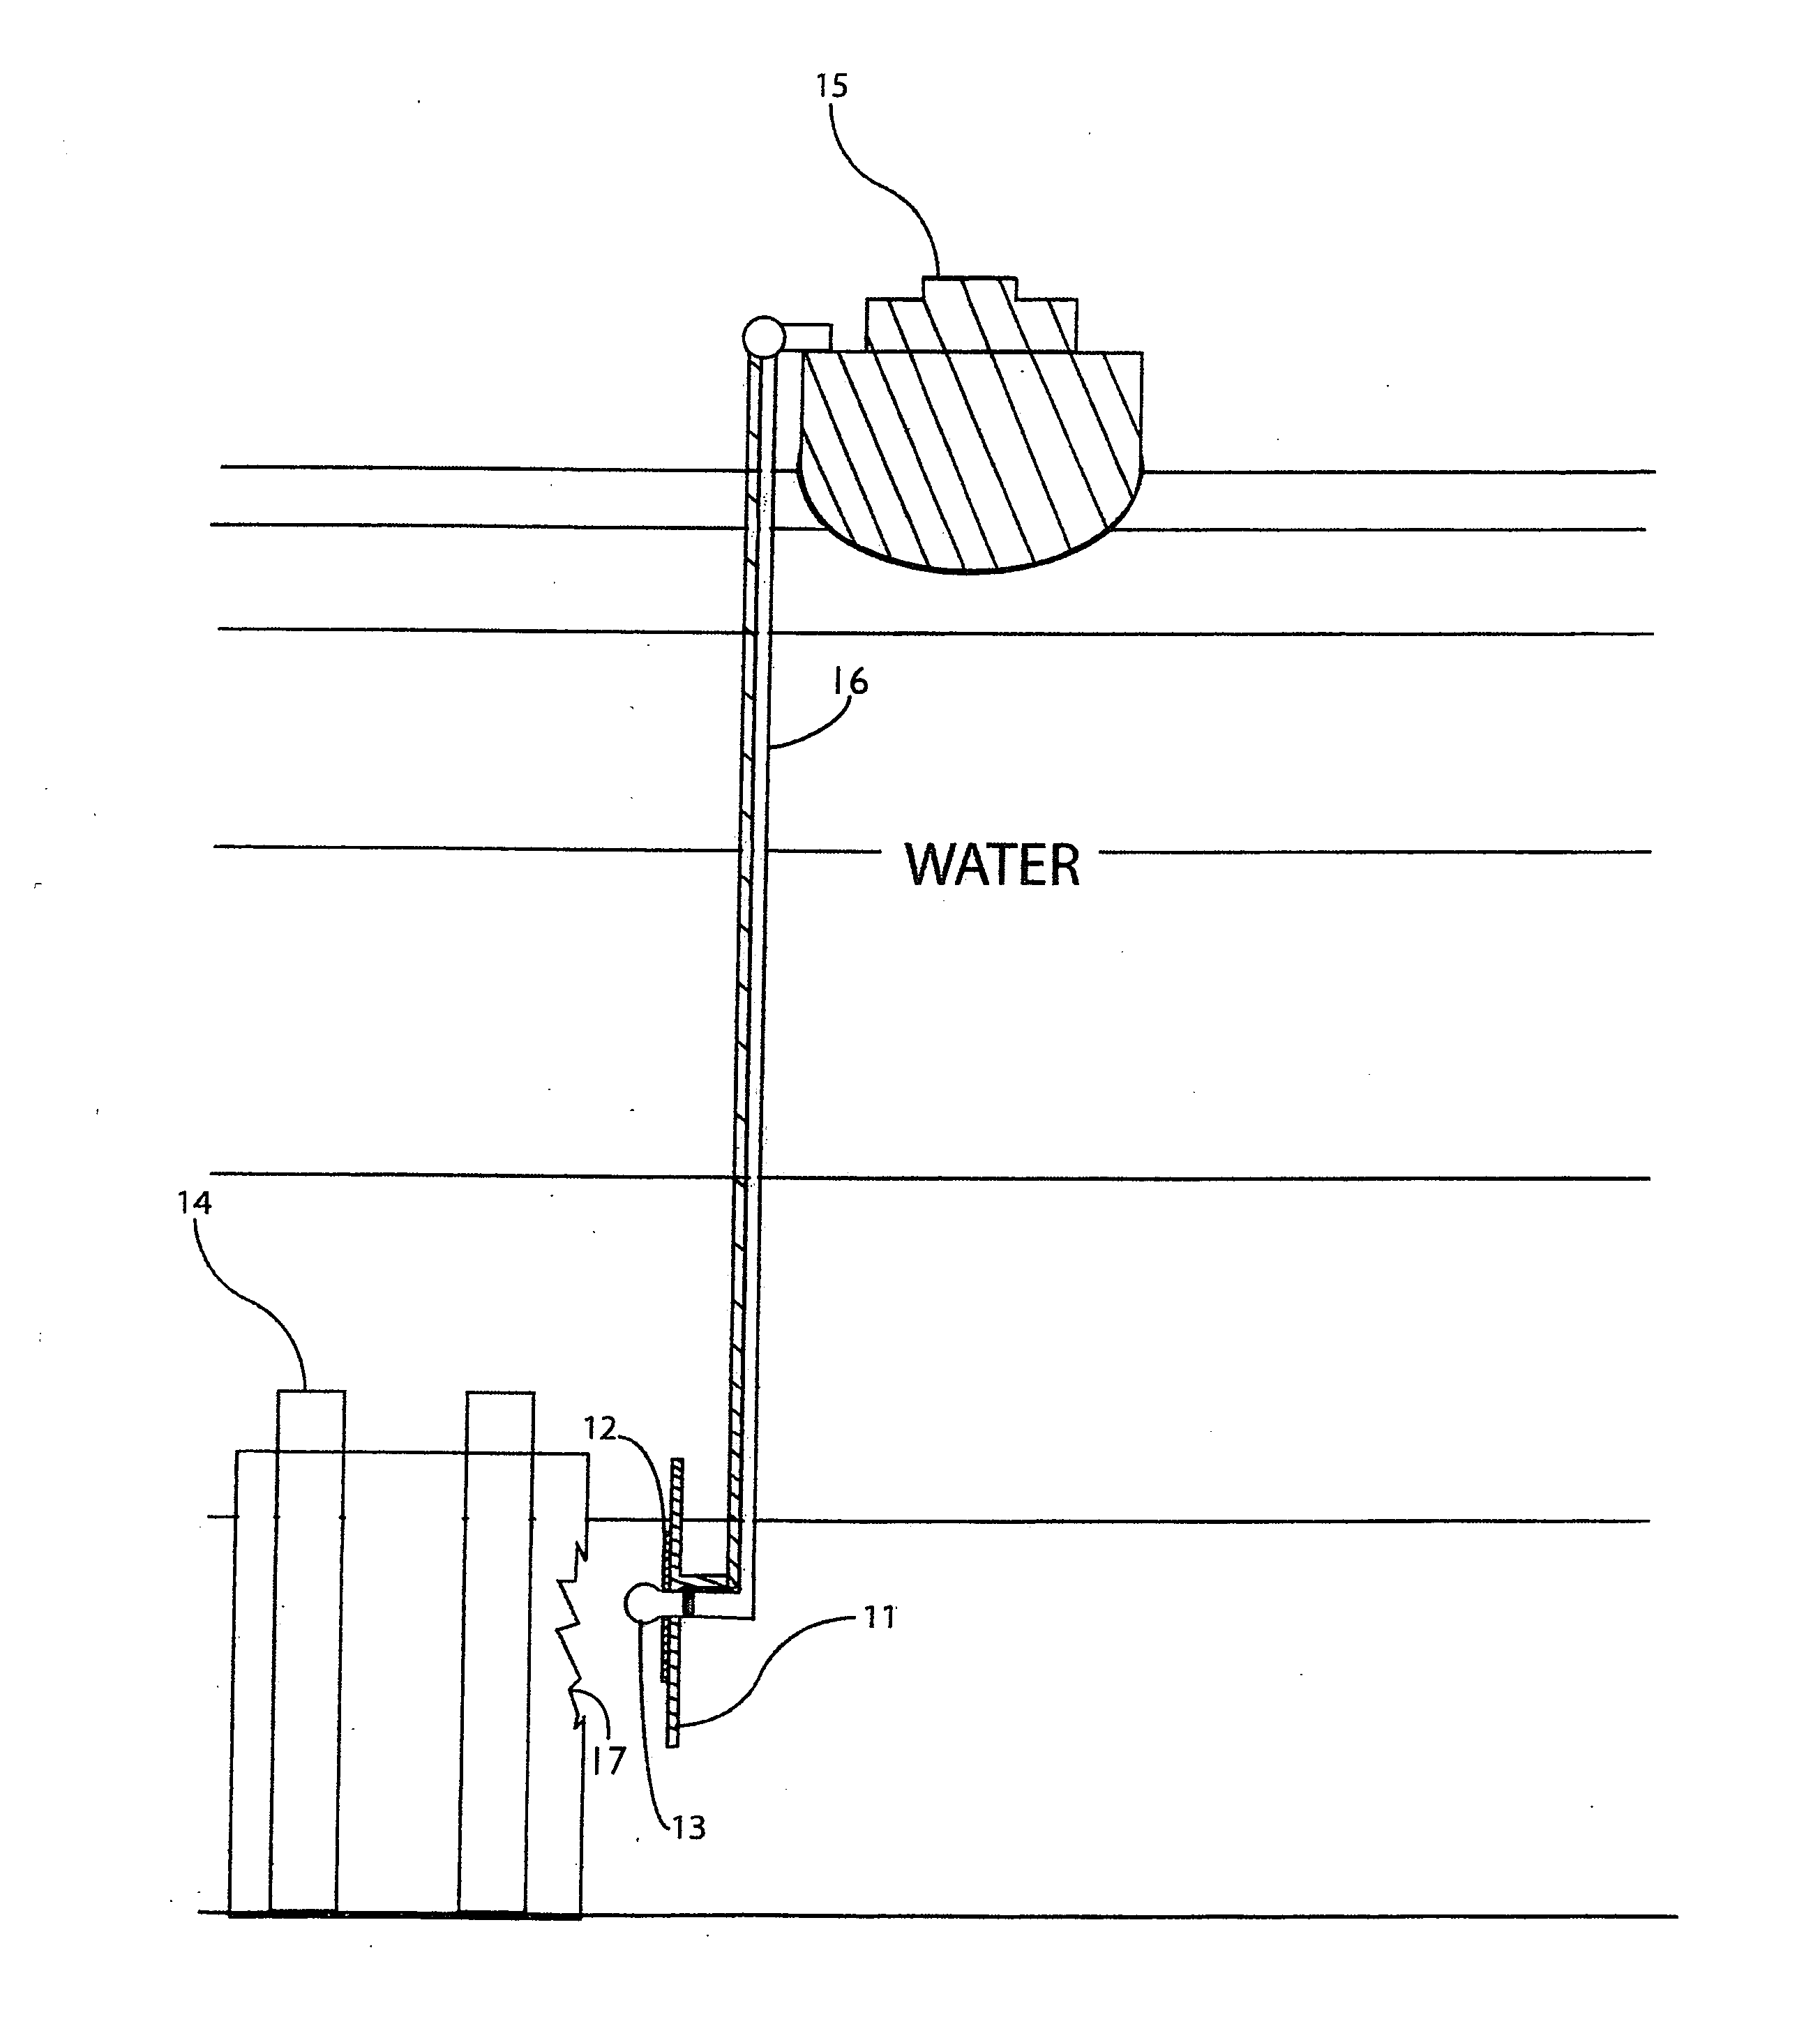 System and method to stop underwater oil well leaks